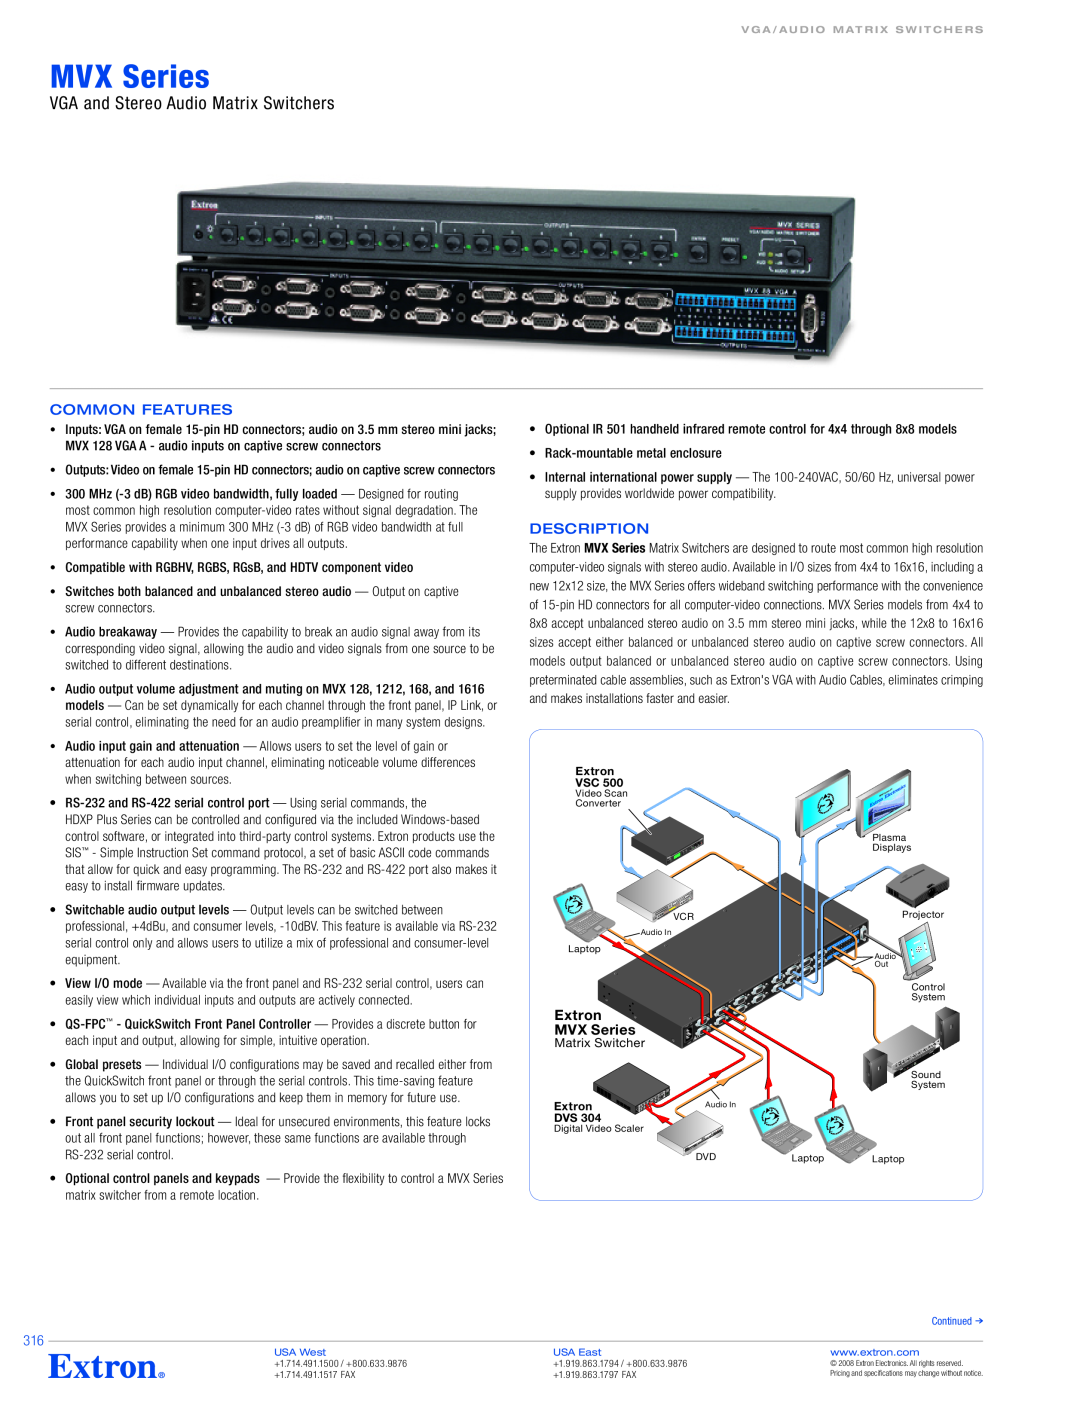 Extron electronic MVX 128 VGA specifications MVX Series, VGA and Stereo Audio Matrix Switchers, Common Features 